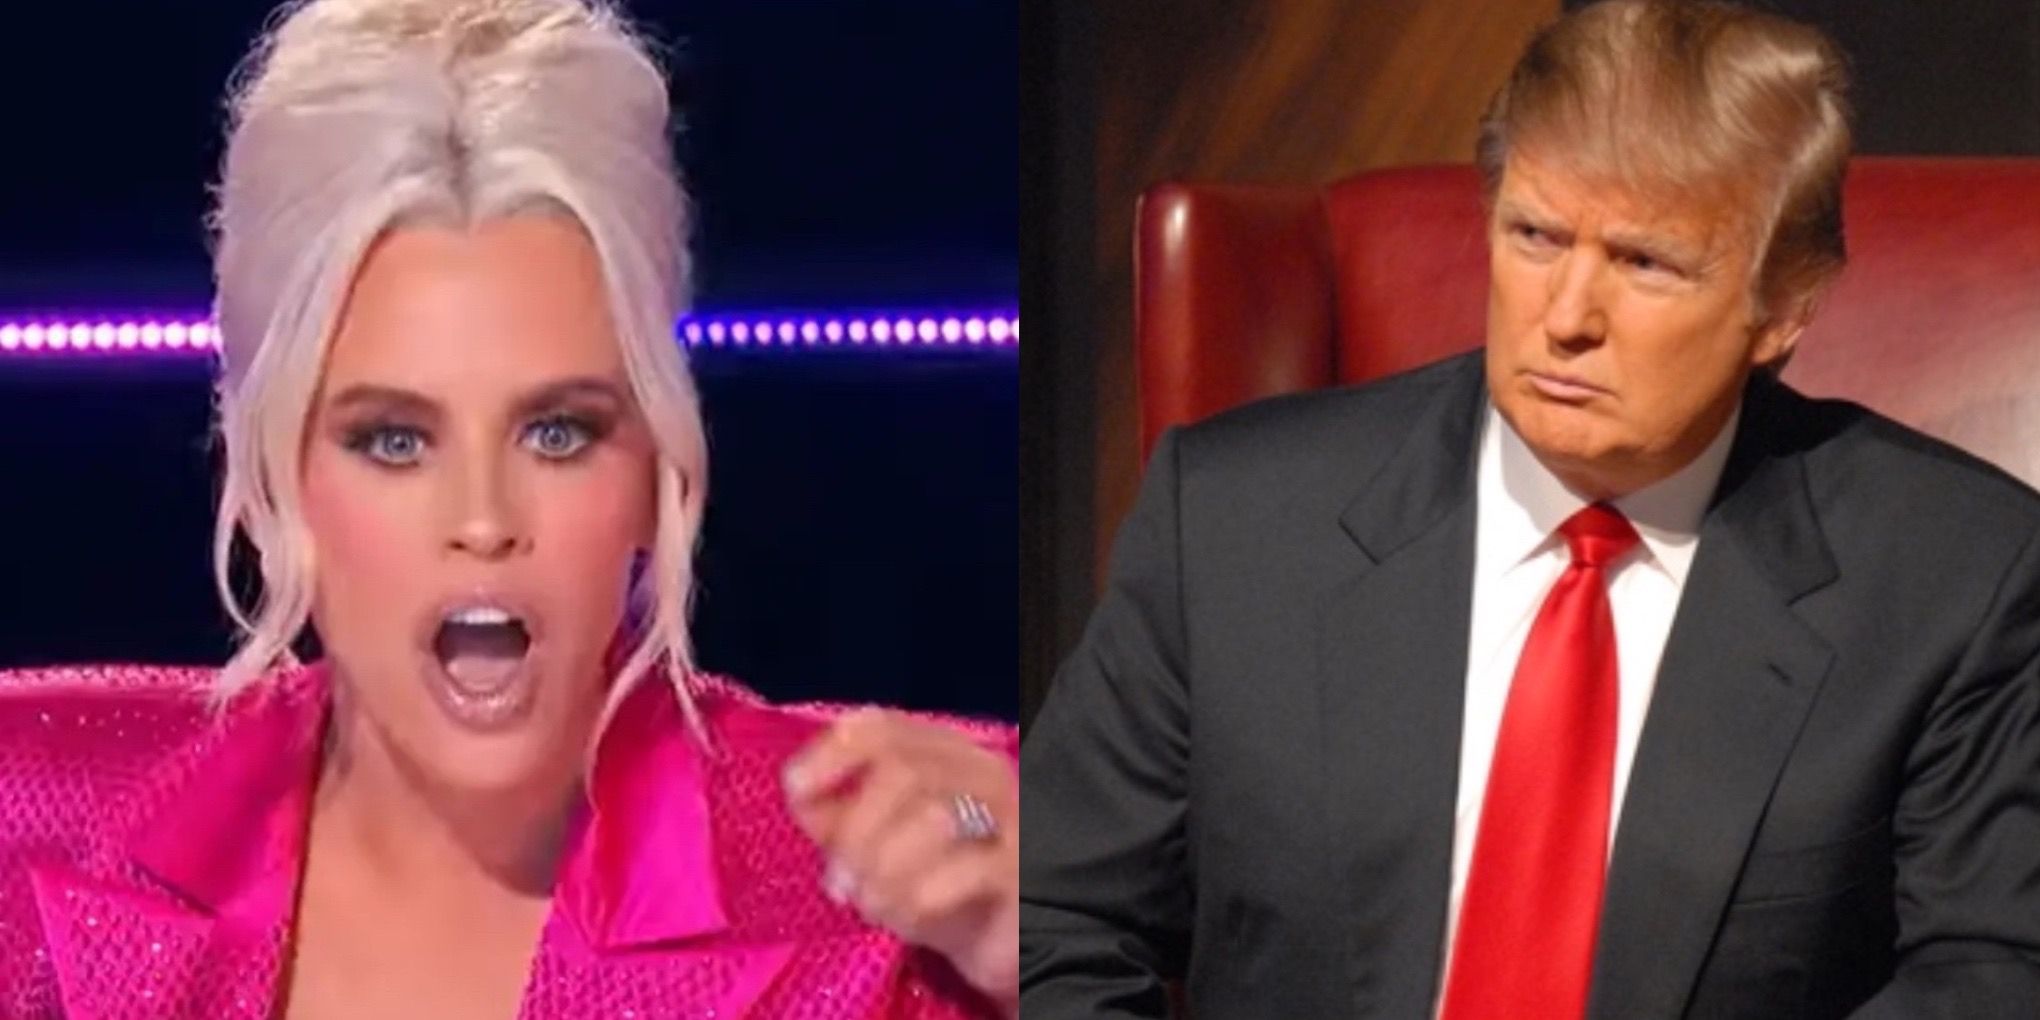 Jenny McCarthy on The Masked Singer and Donald Trump on The Apprentice